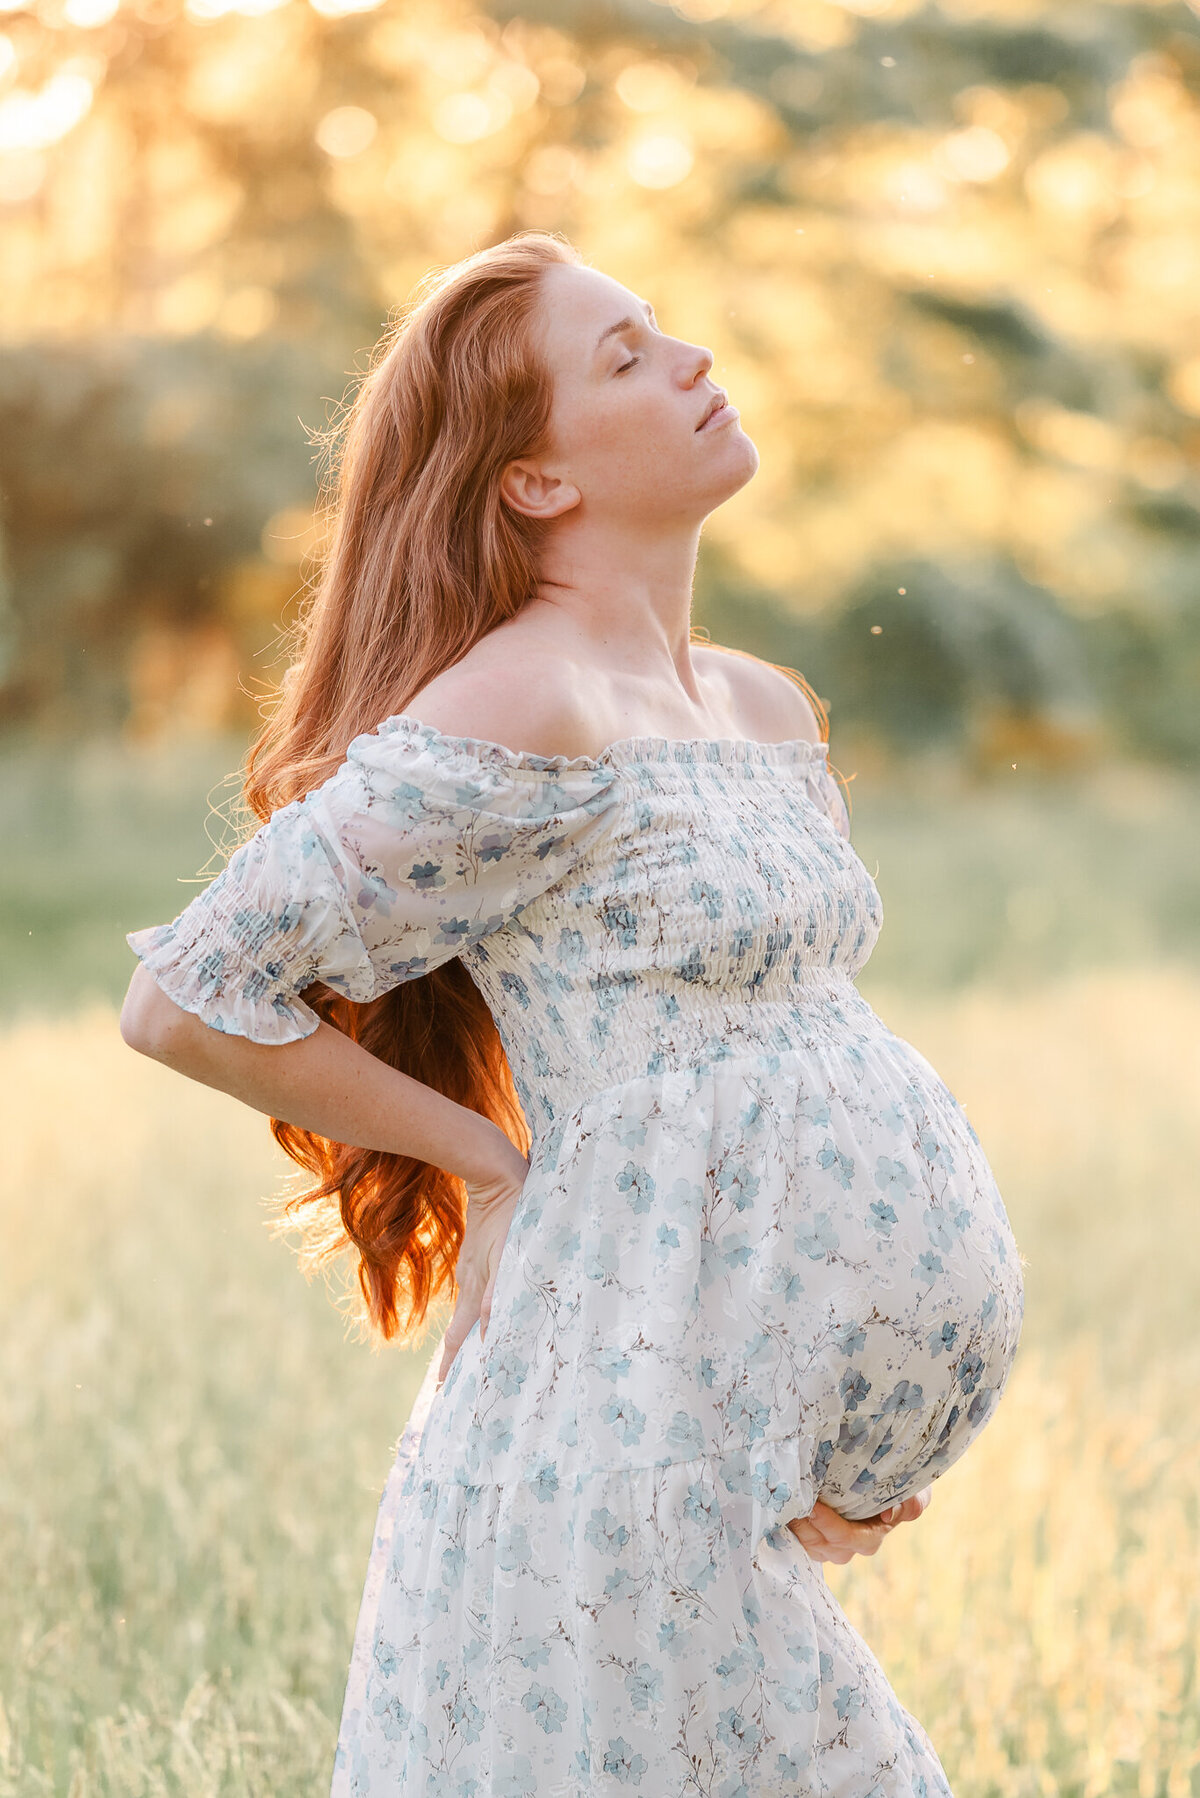 An expectant mother, wearing a white dress with blue flowers, arches her back and tips her head back. She is standing in a grassy field. The setting sun is glowing through the trees behind her.